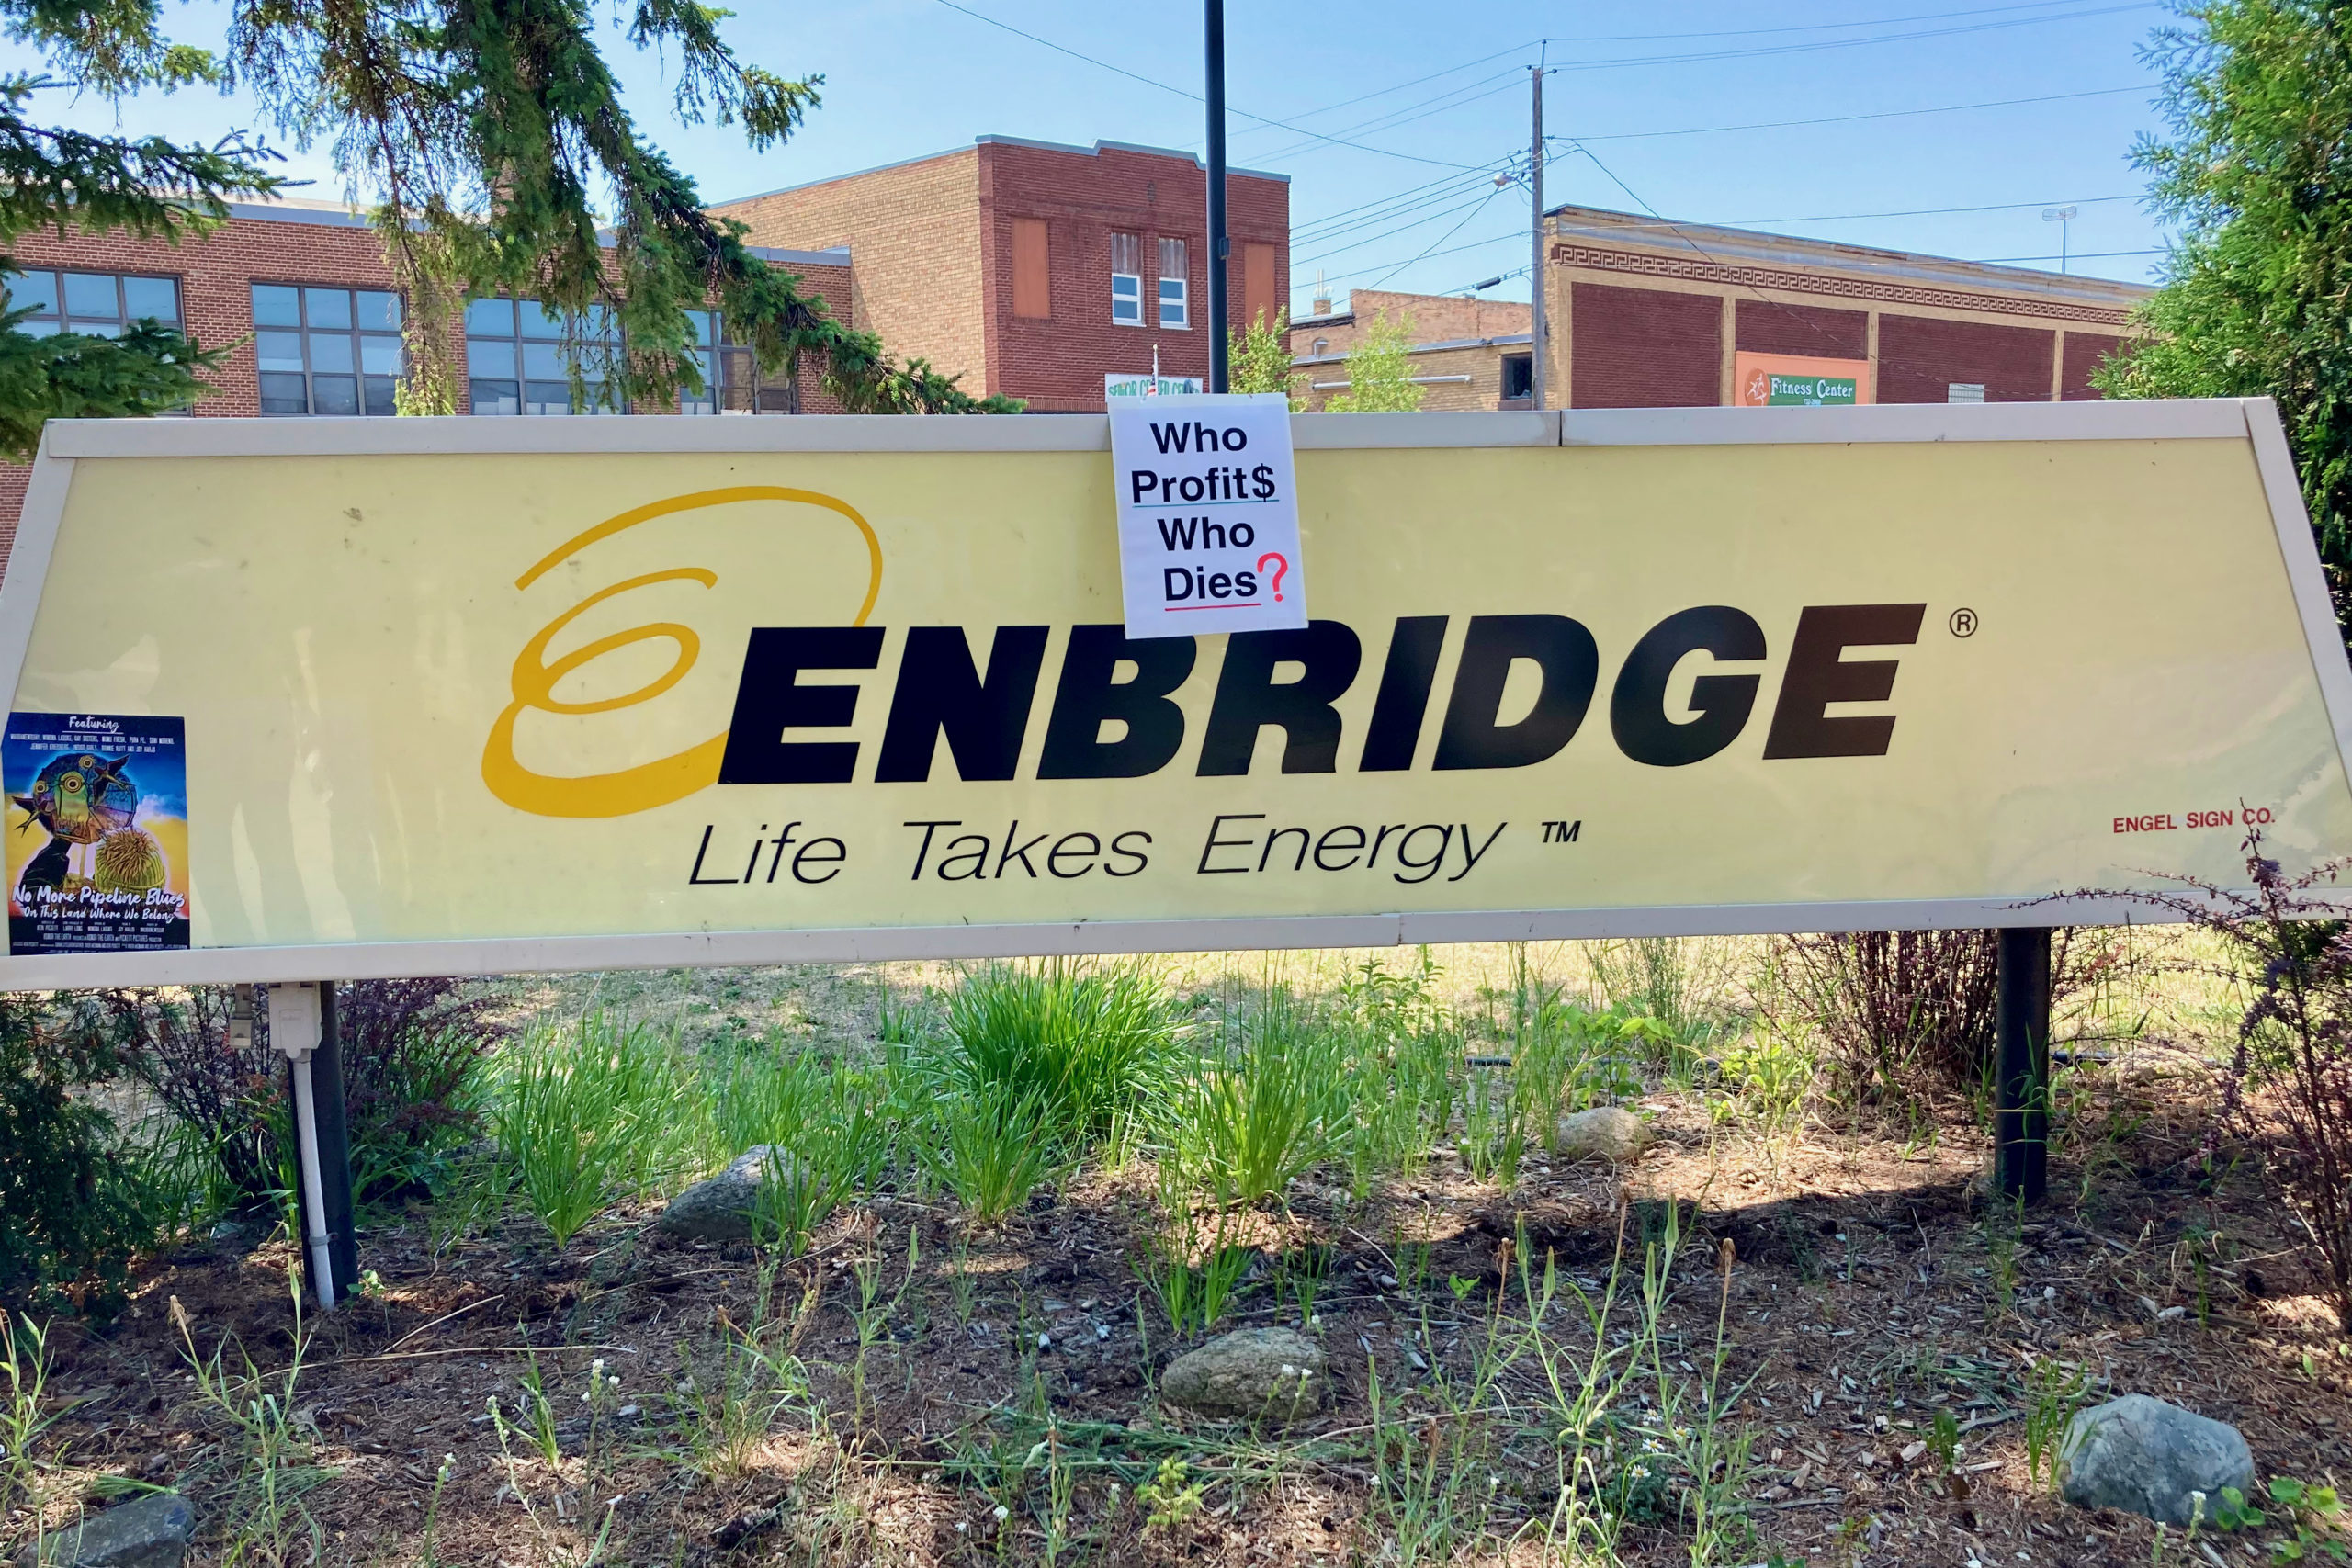 A sign left behind on the Enbridge entrance’s sign reads, “Who Profit$ Who Dies?”